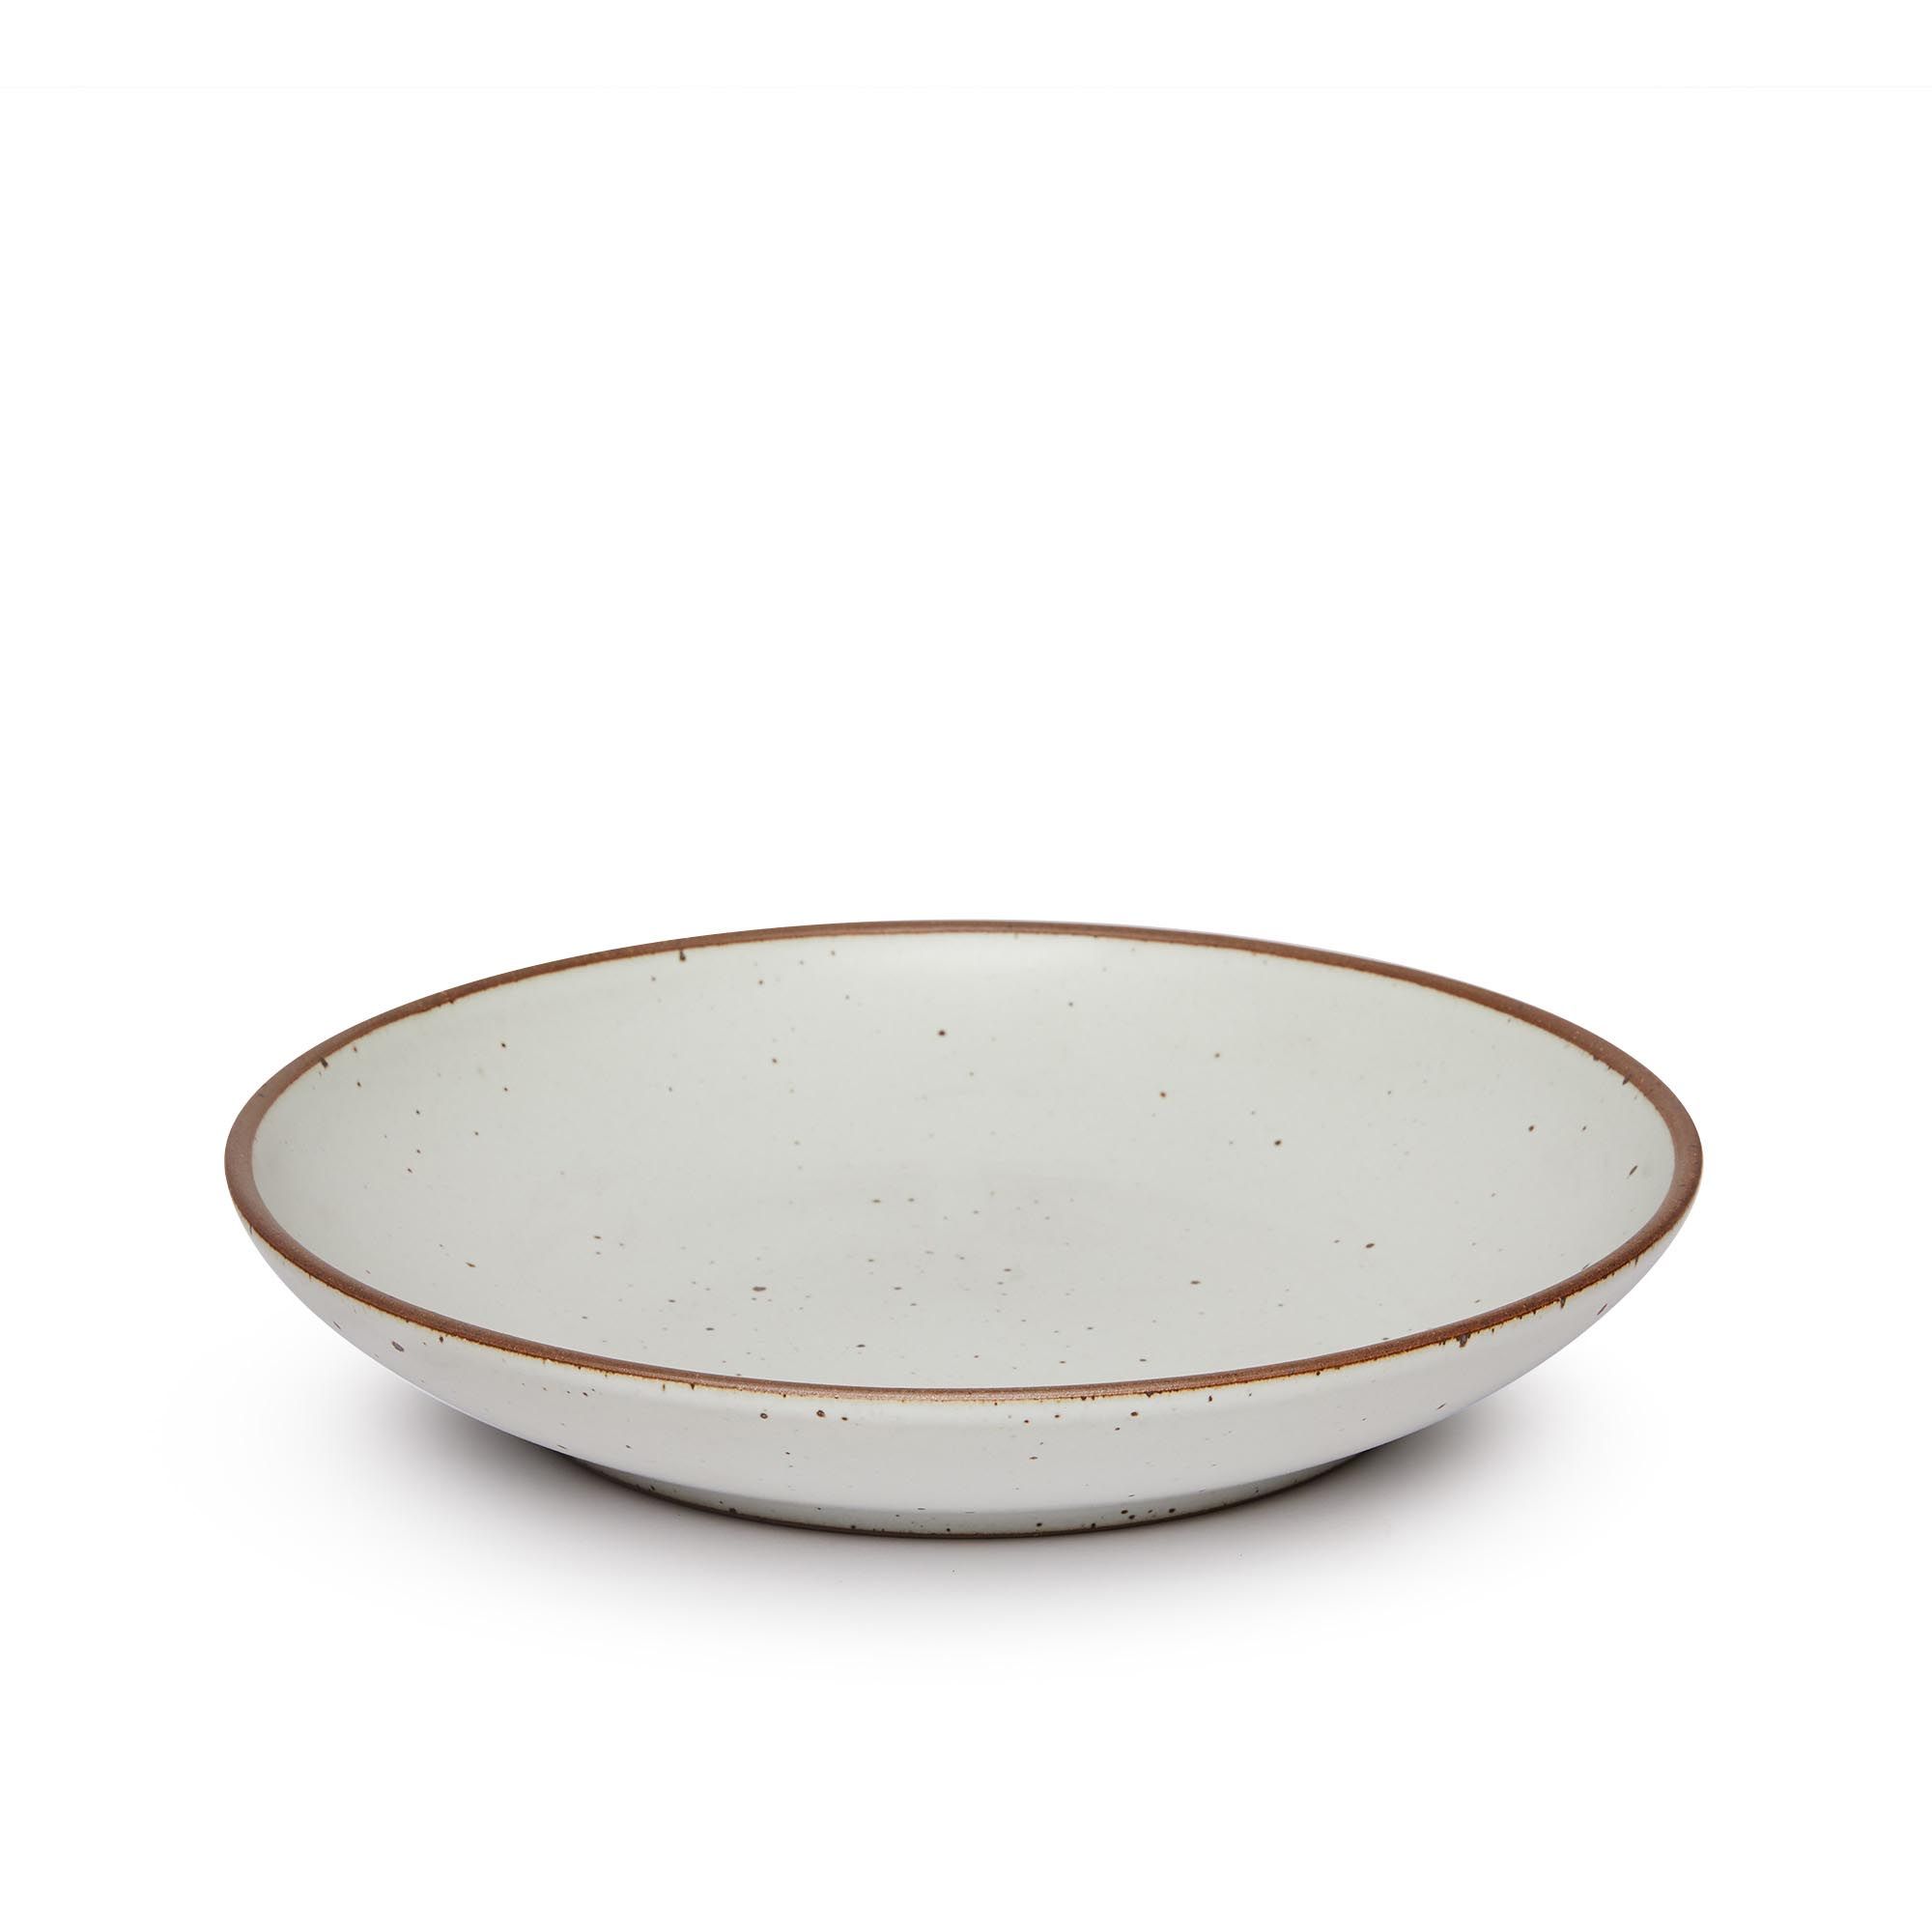 A large ceramic plate with a curved bowl edge in a cool white color featuring iron speckles and an unglazed rim.